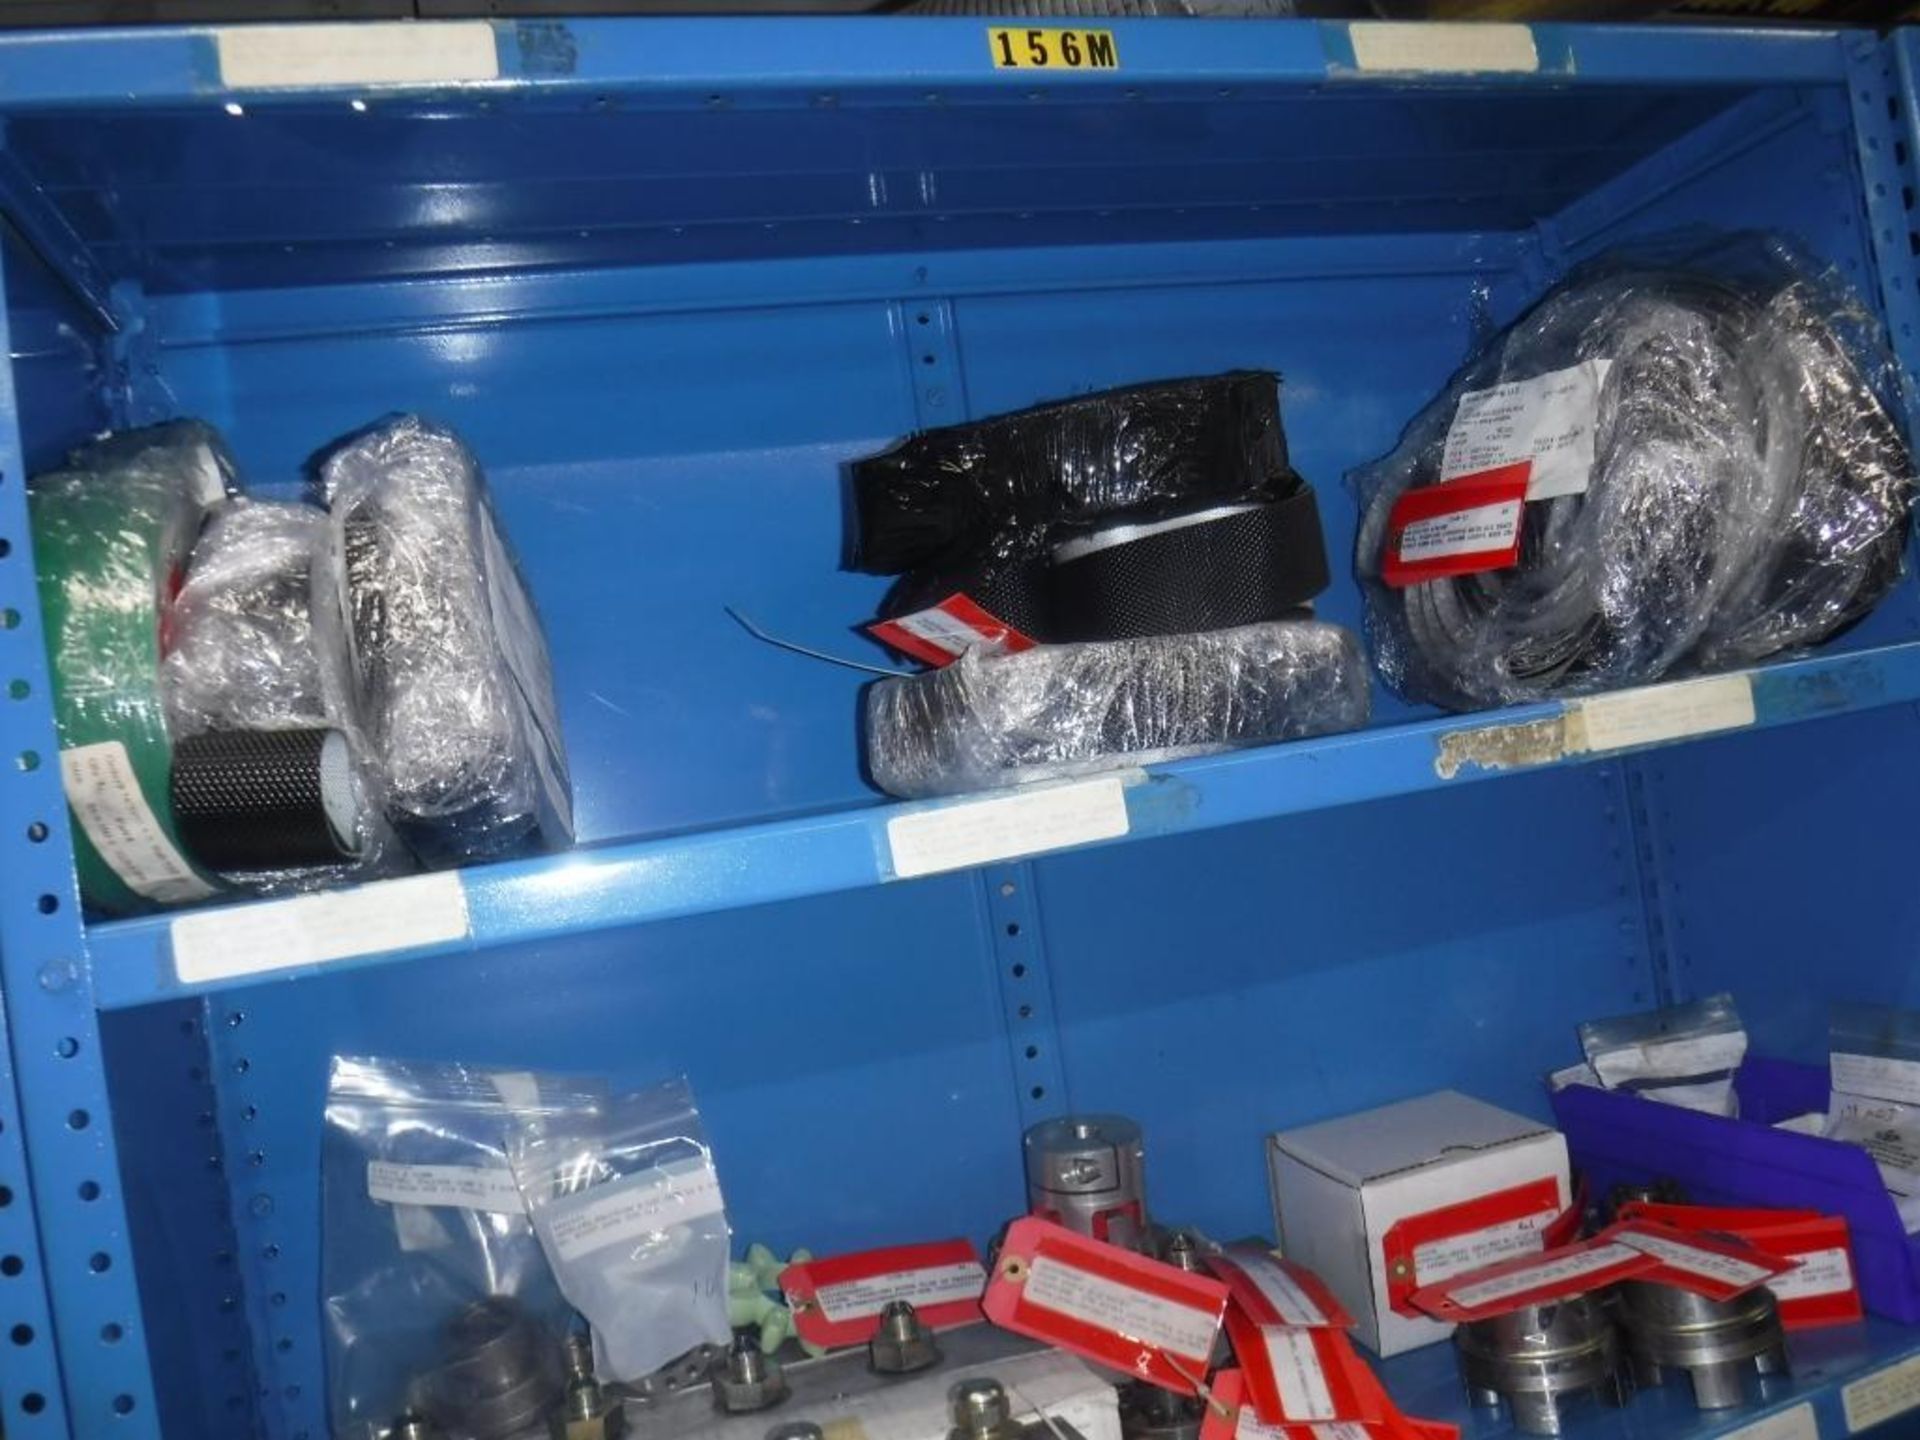 Contents of Shelving 155M Thru 164-5M-Pins,Valves,Shafts,Socket,Actuator,Idler Wheel,Wire Carrier,Ai - Image 4 of 33